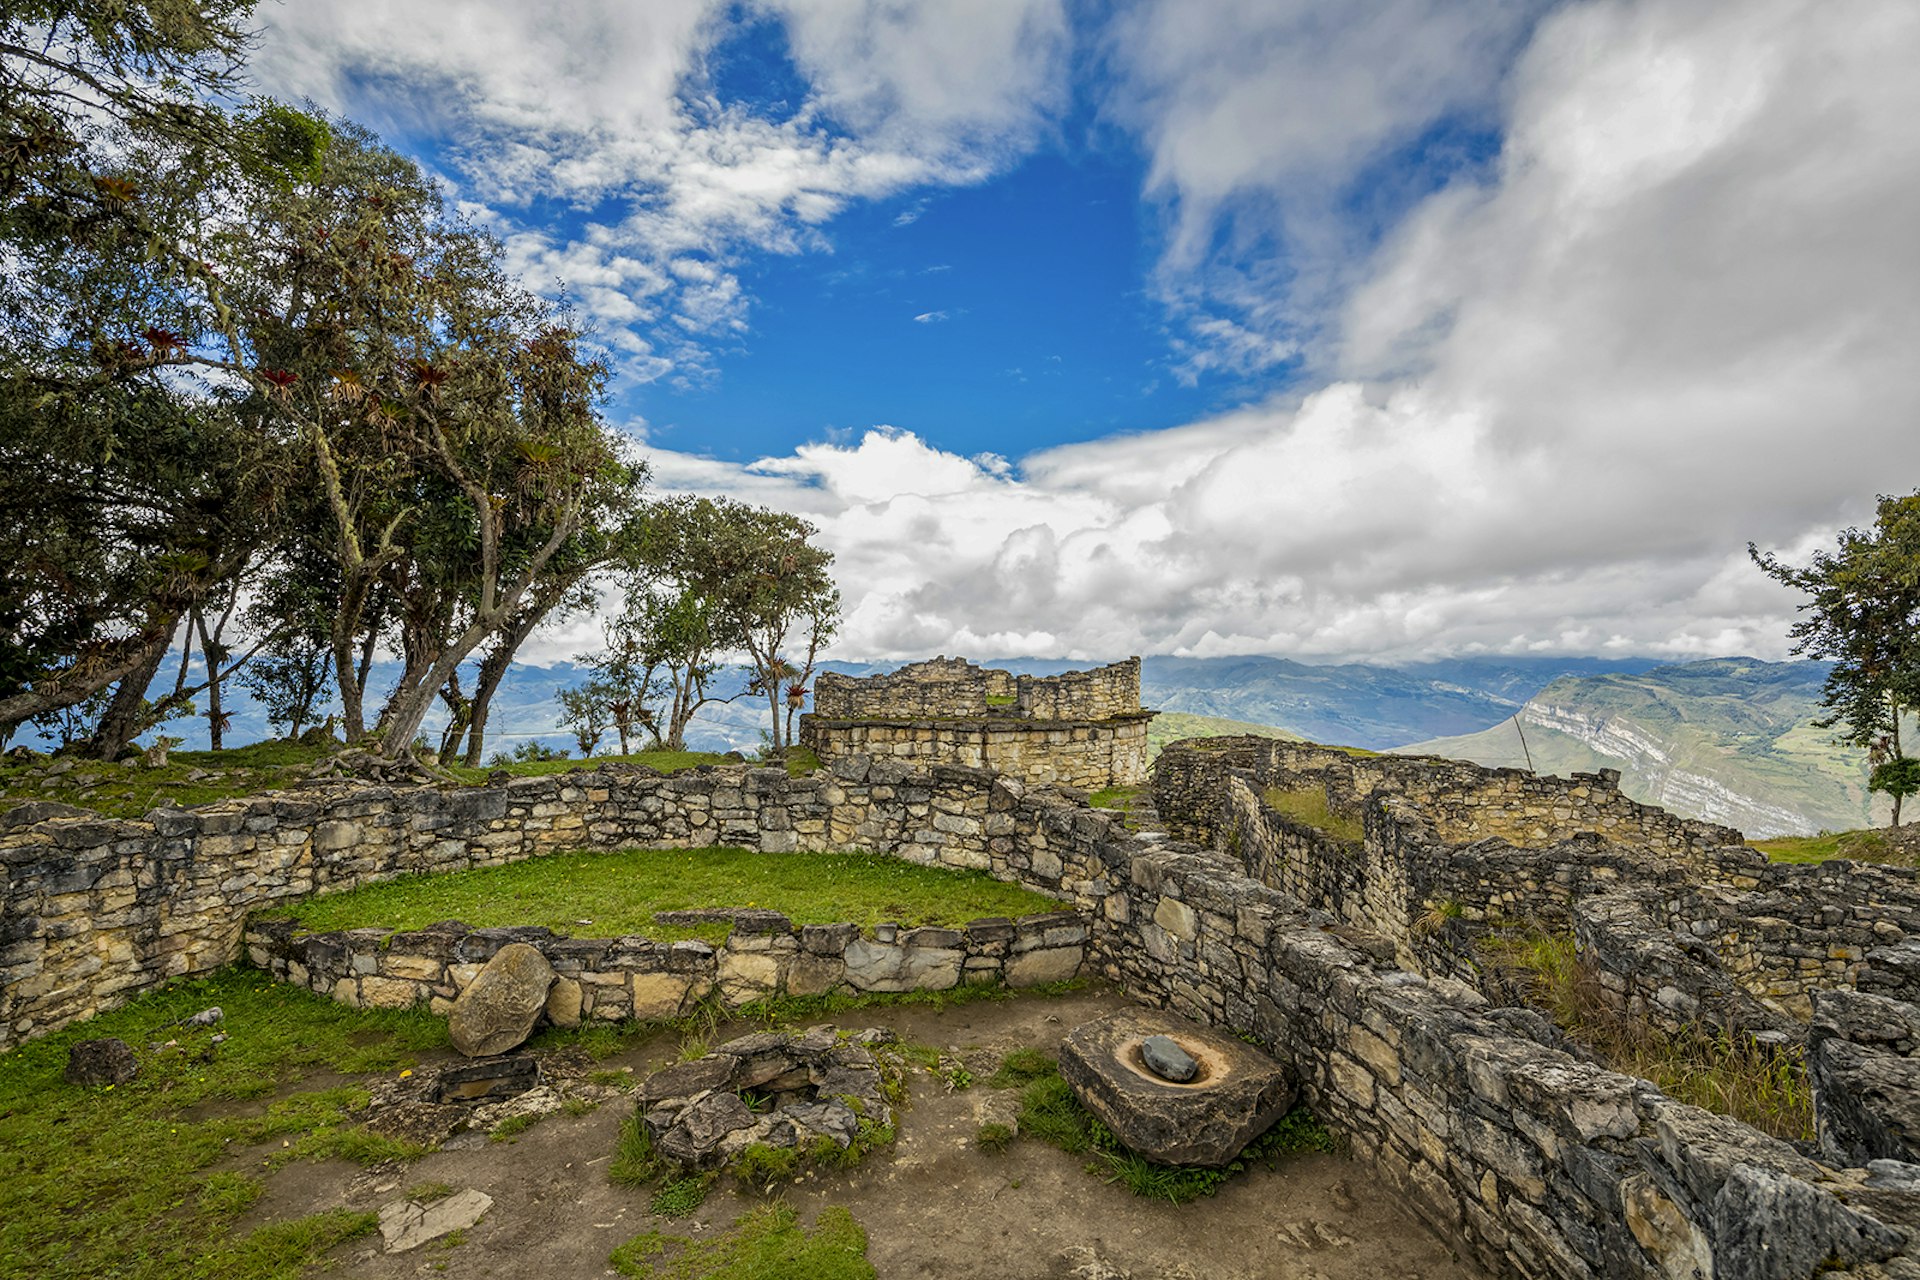 Ruins of building foundations at Kuélap with a mountain valley in the background © Westend61 / Getty Images